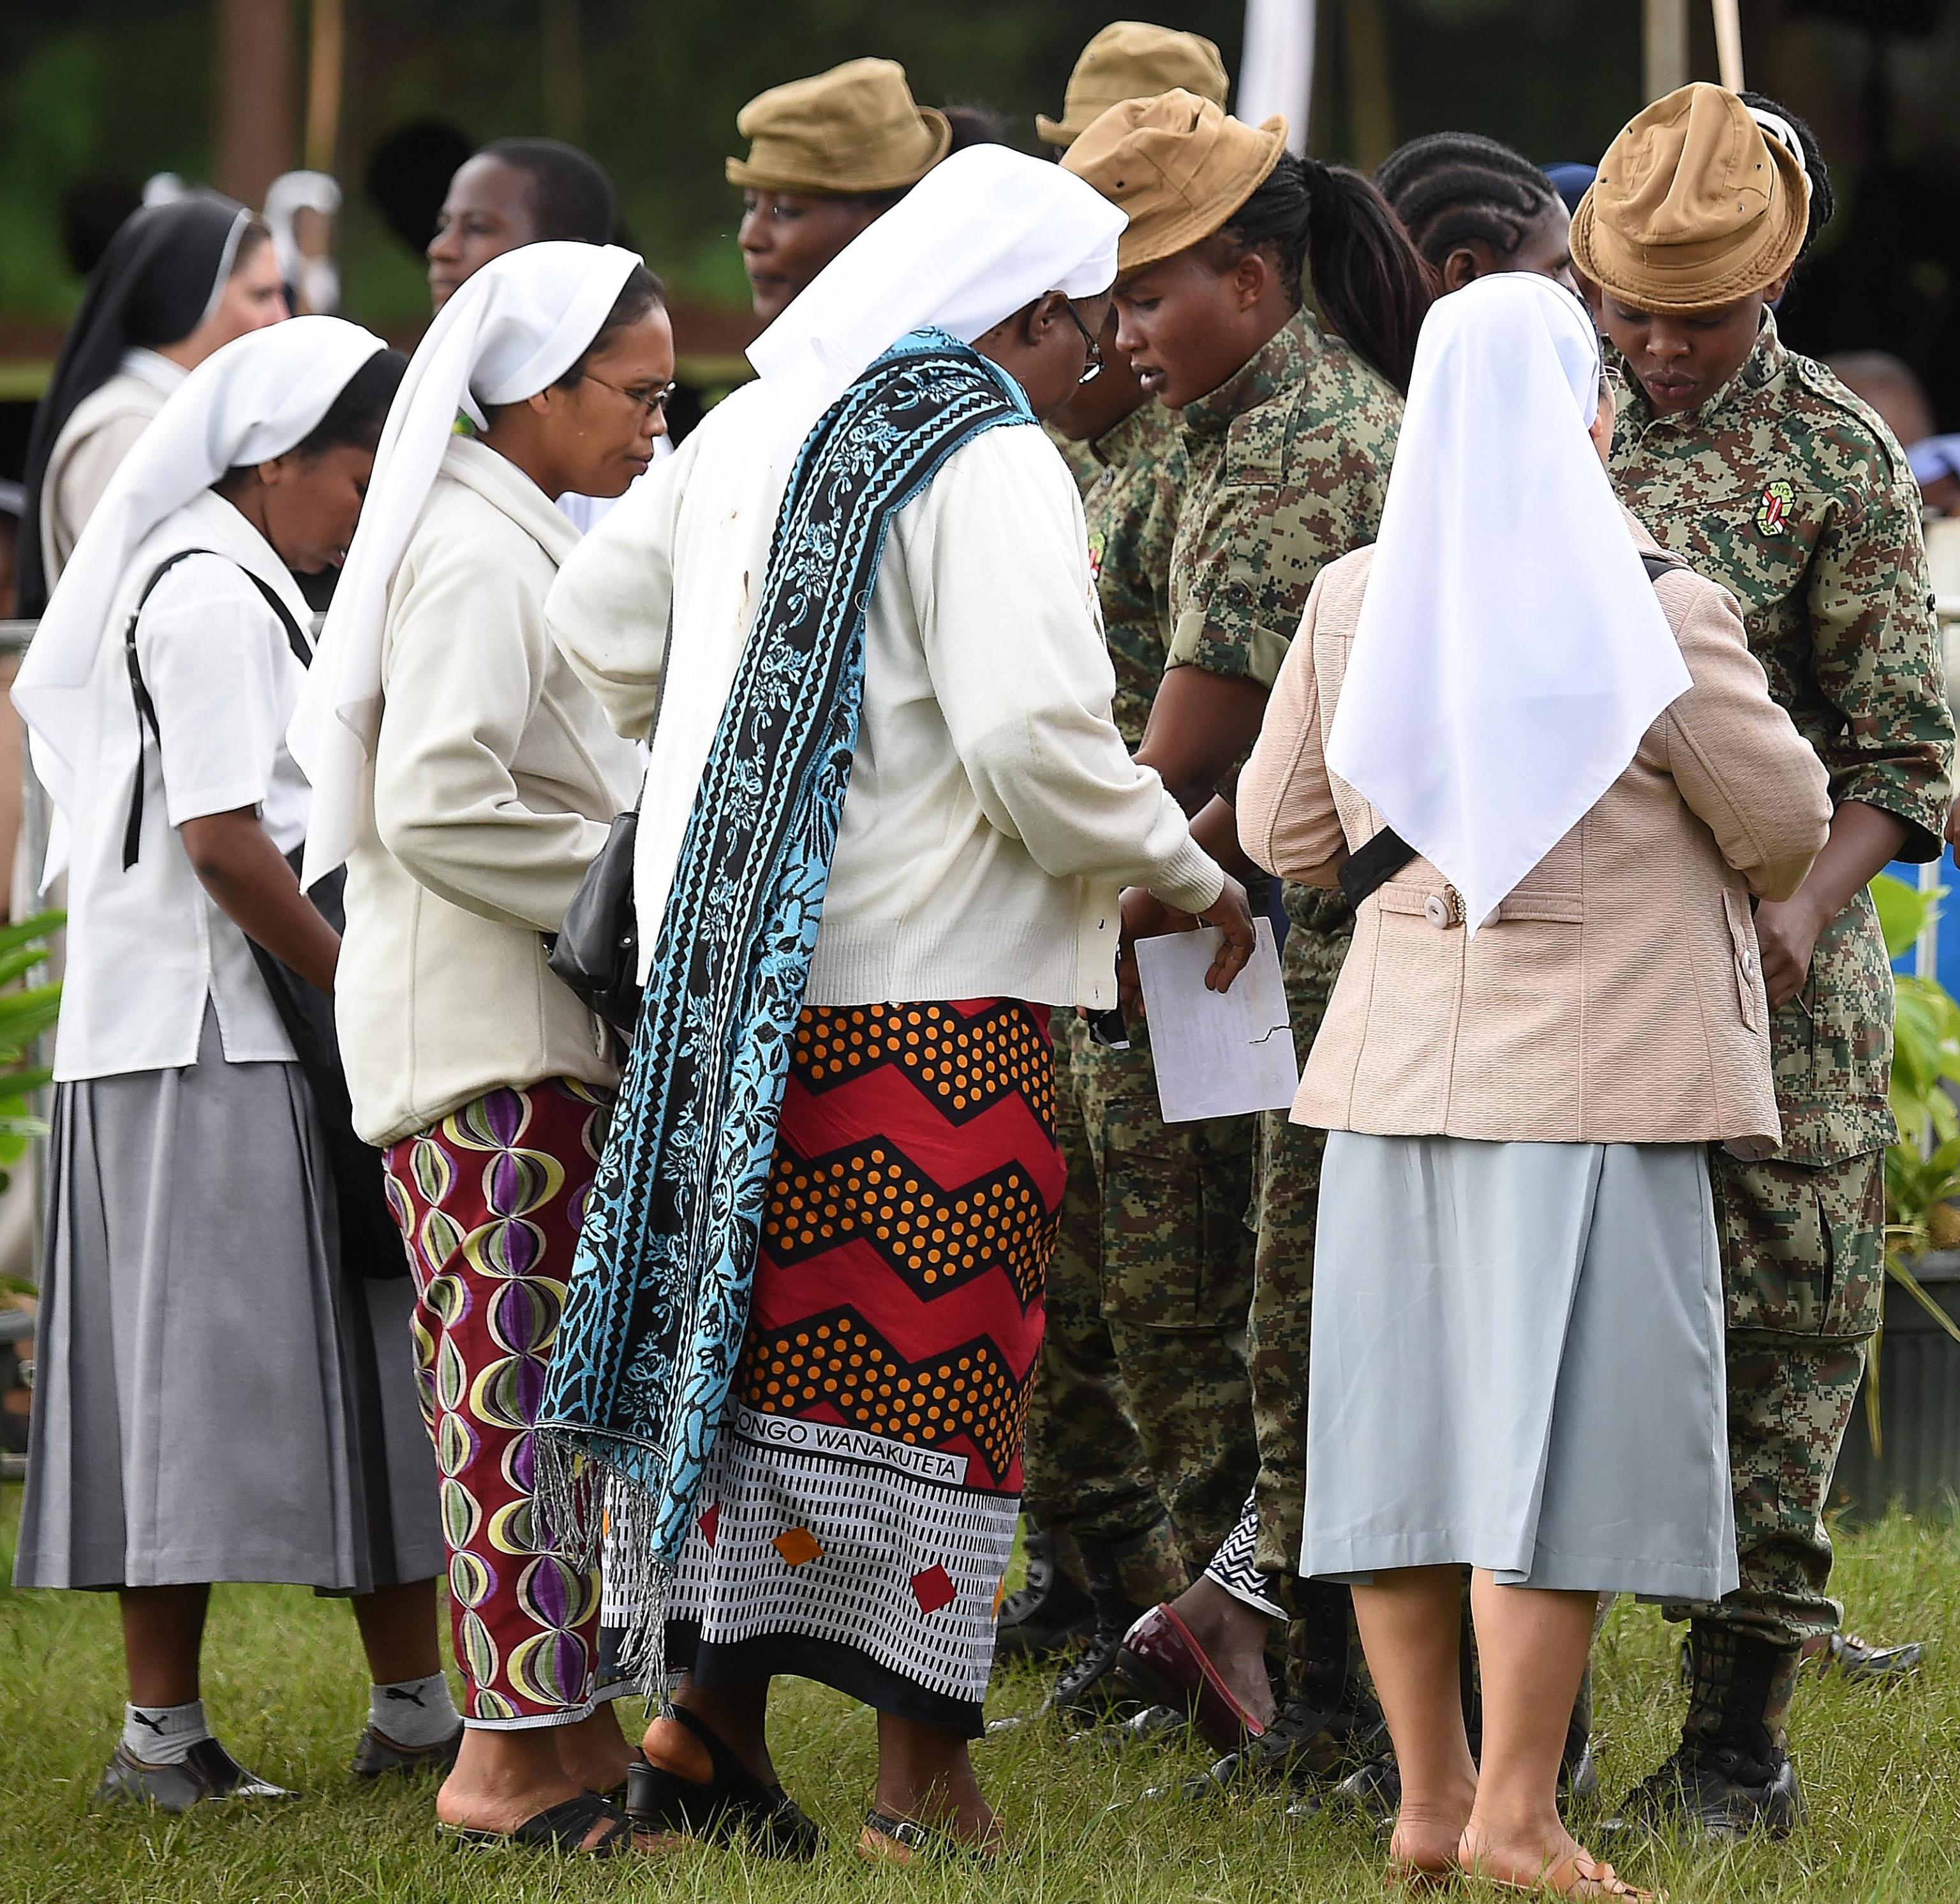 Nuns are checked by security army upon their arrival at the St. Mary's school to attend a meeting of Pope Francis and the clergy and religious in Nairobi